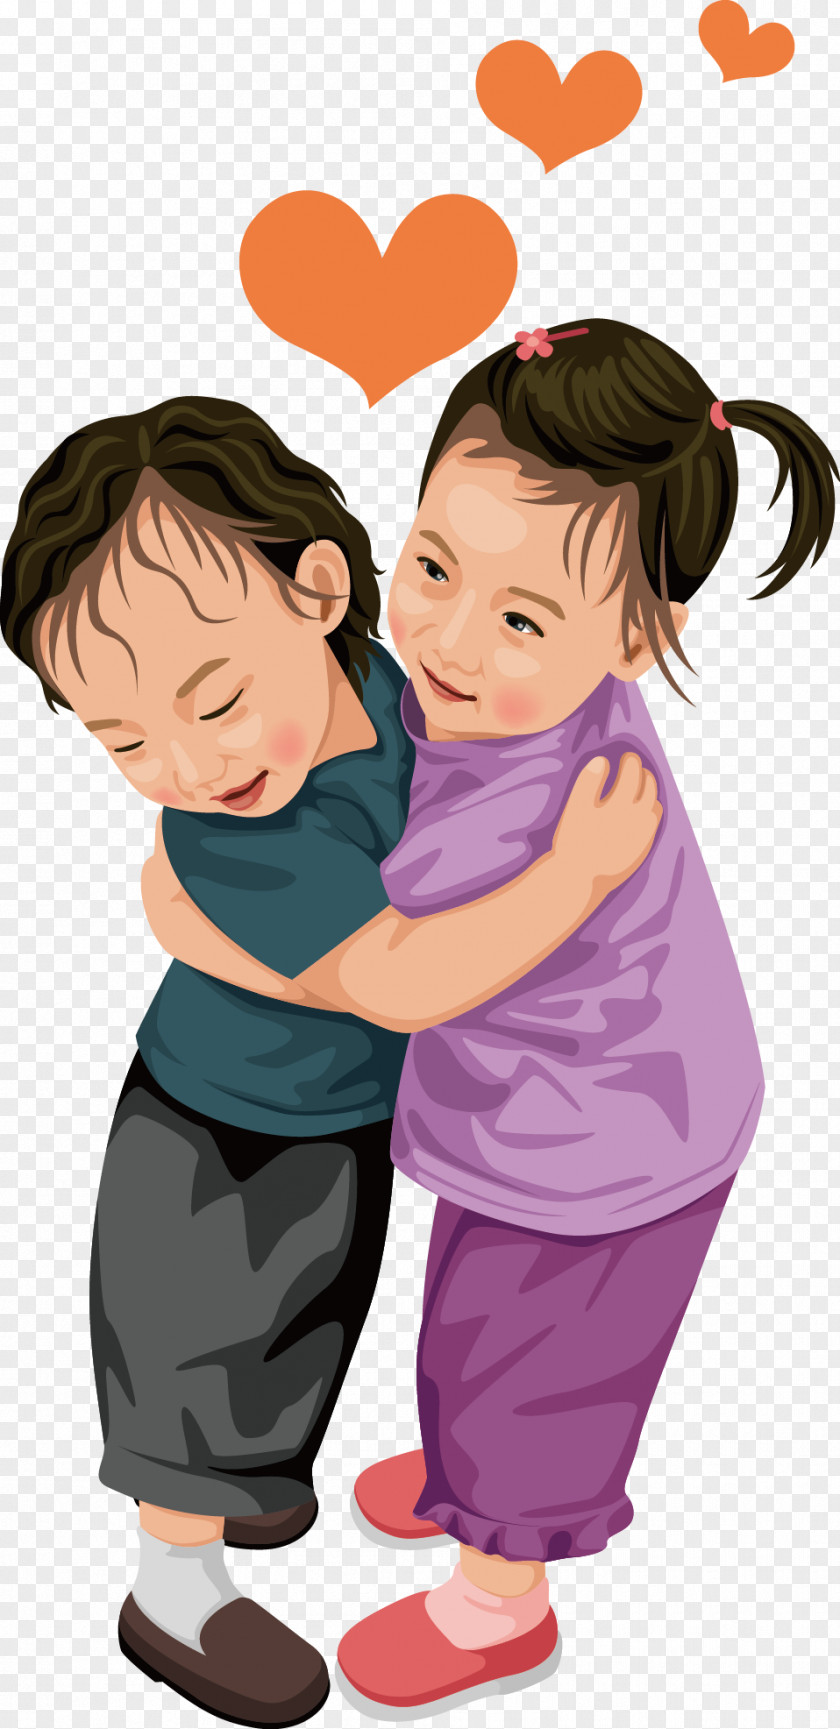 Men And Women Embrace Cartoon Drawing Google Images Child PNG